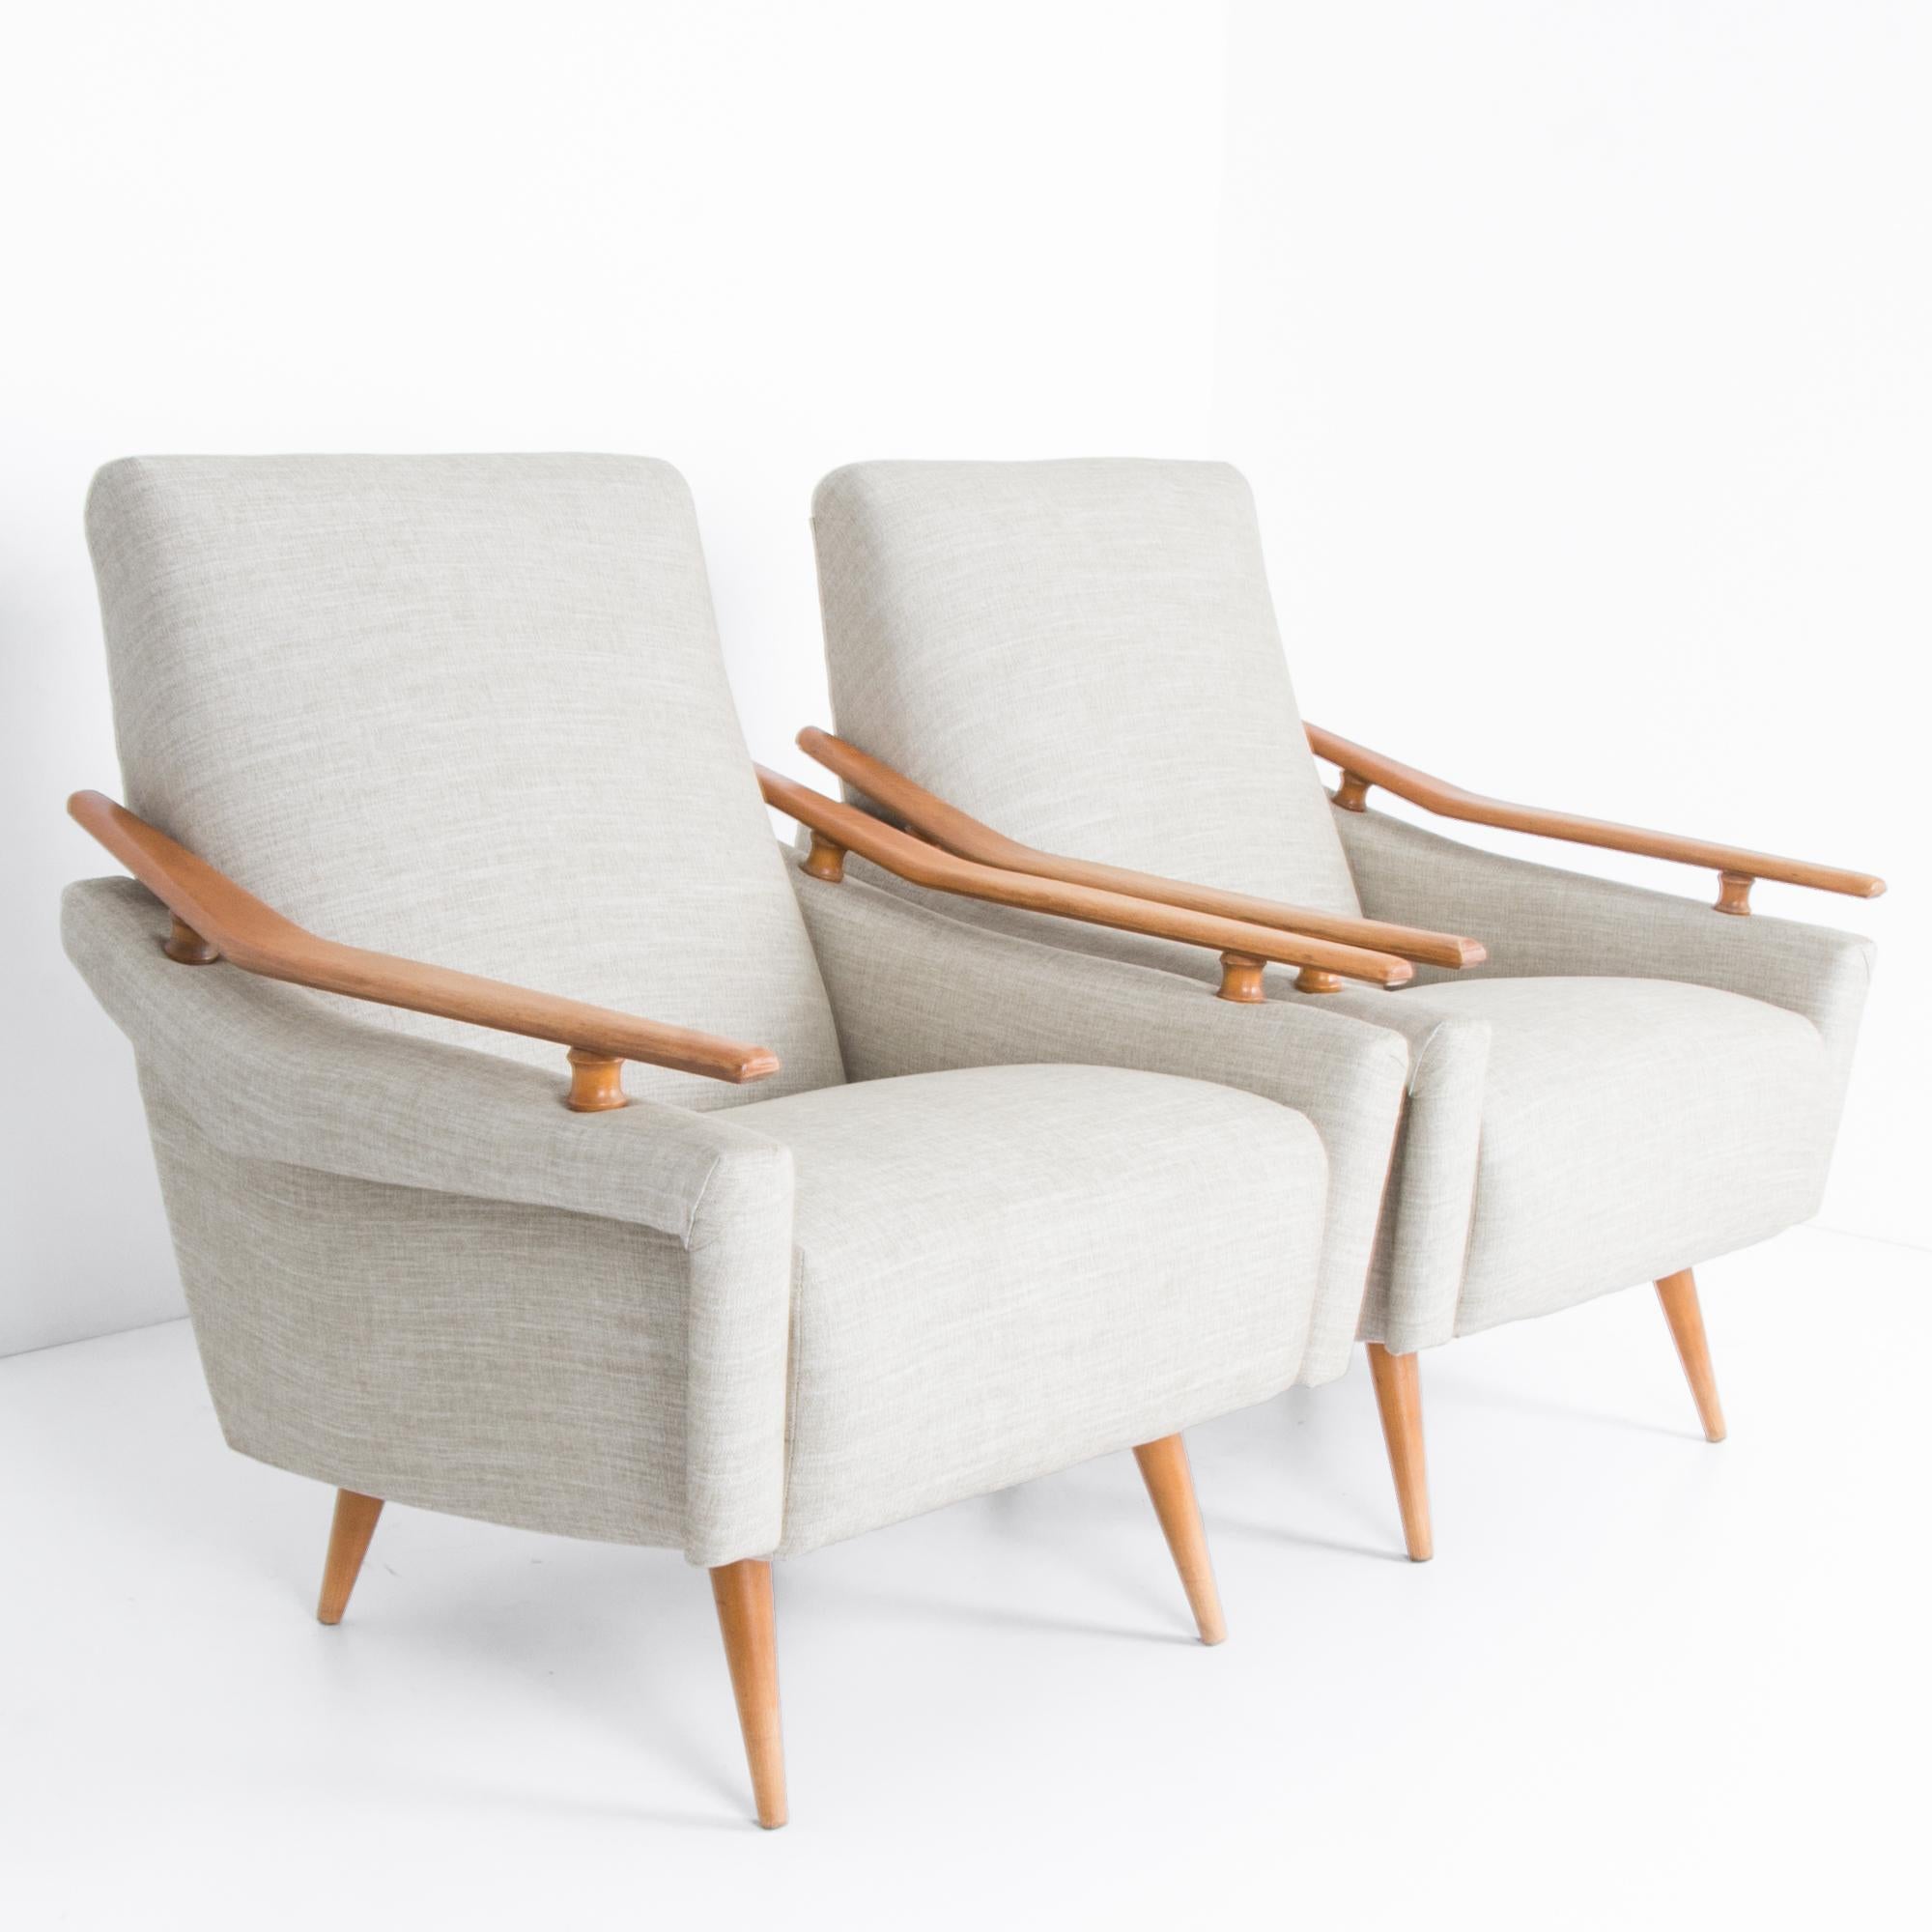 1960s French Mid-Century Modern Armchairs, a Pair 2